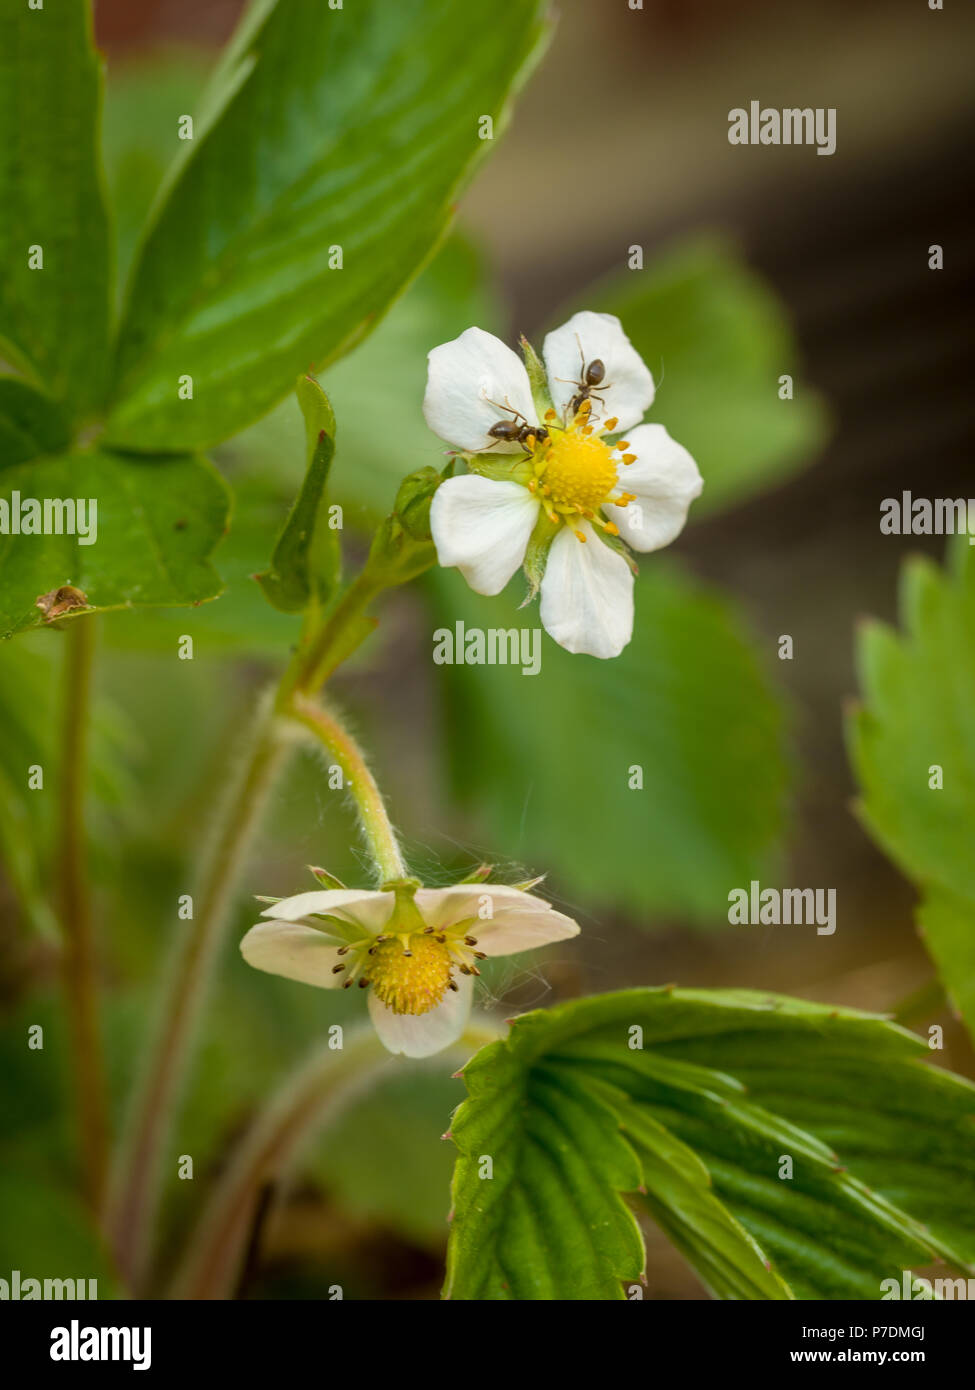 Two worker ants crawling on the petals of a wild strawberry plant, Fragaria vesca. Stock Photo